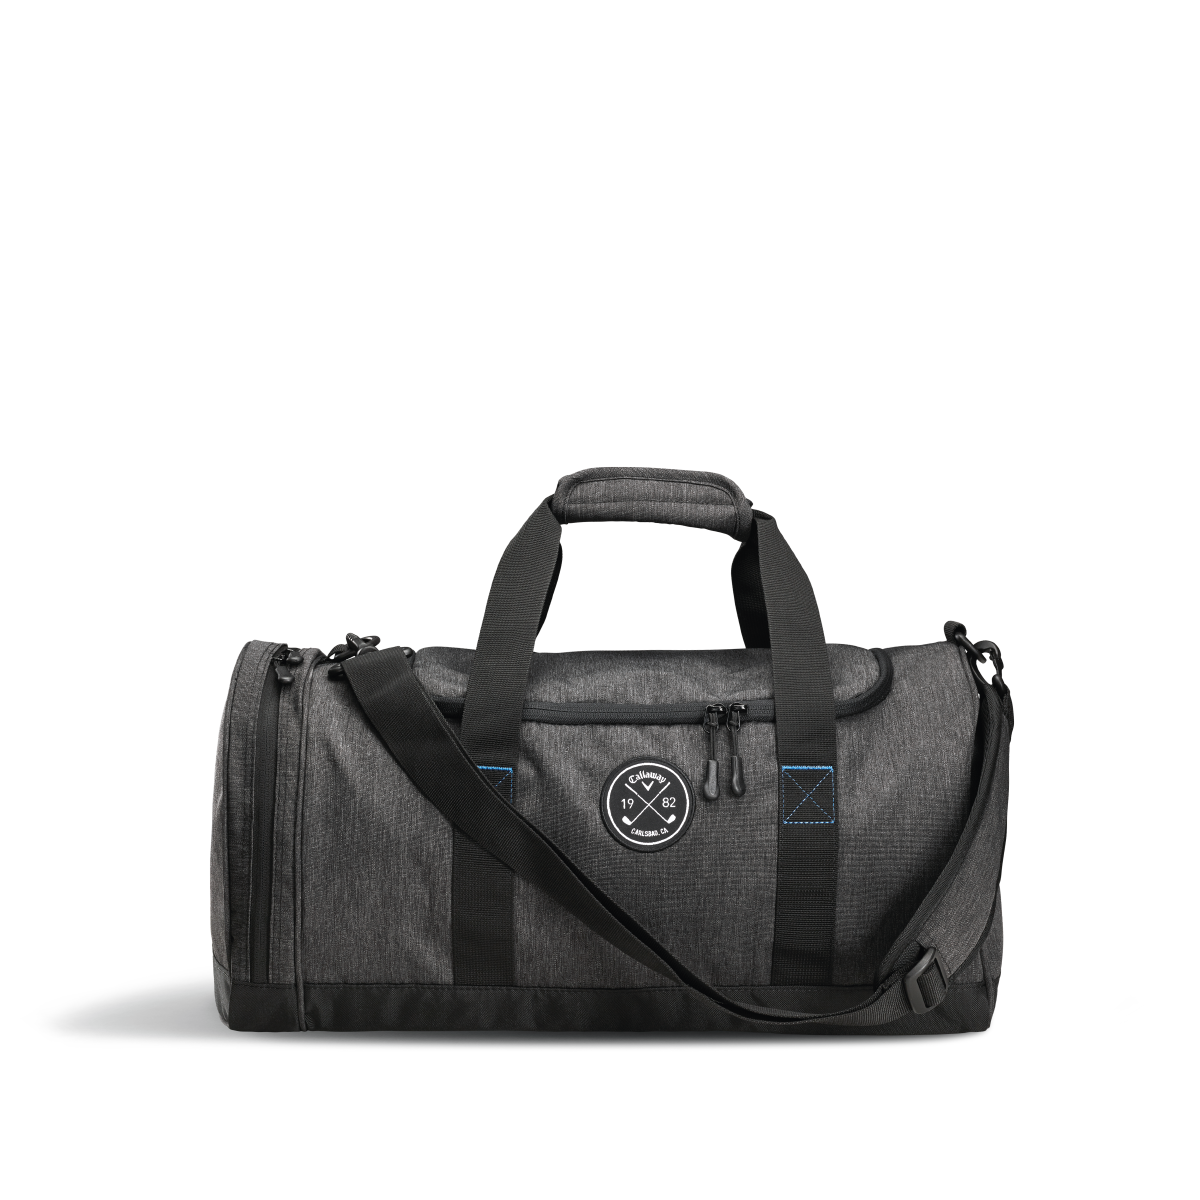 GREY GOLF SMALL DUFFLE BAG - CLUBHOUSE COLLECTION